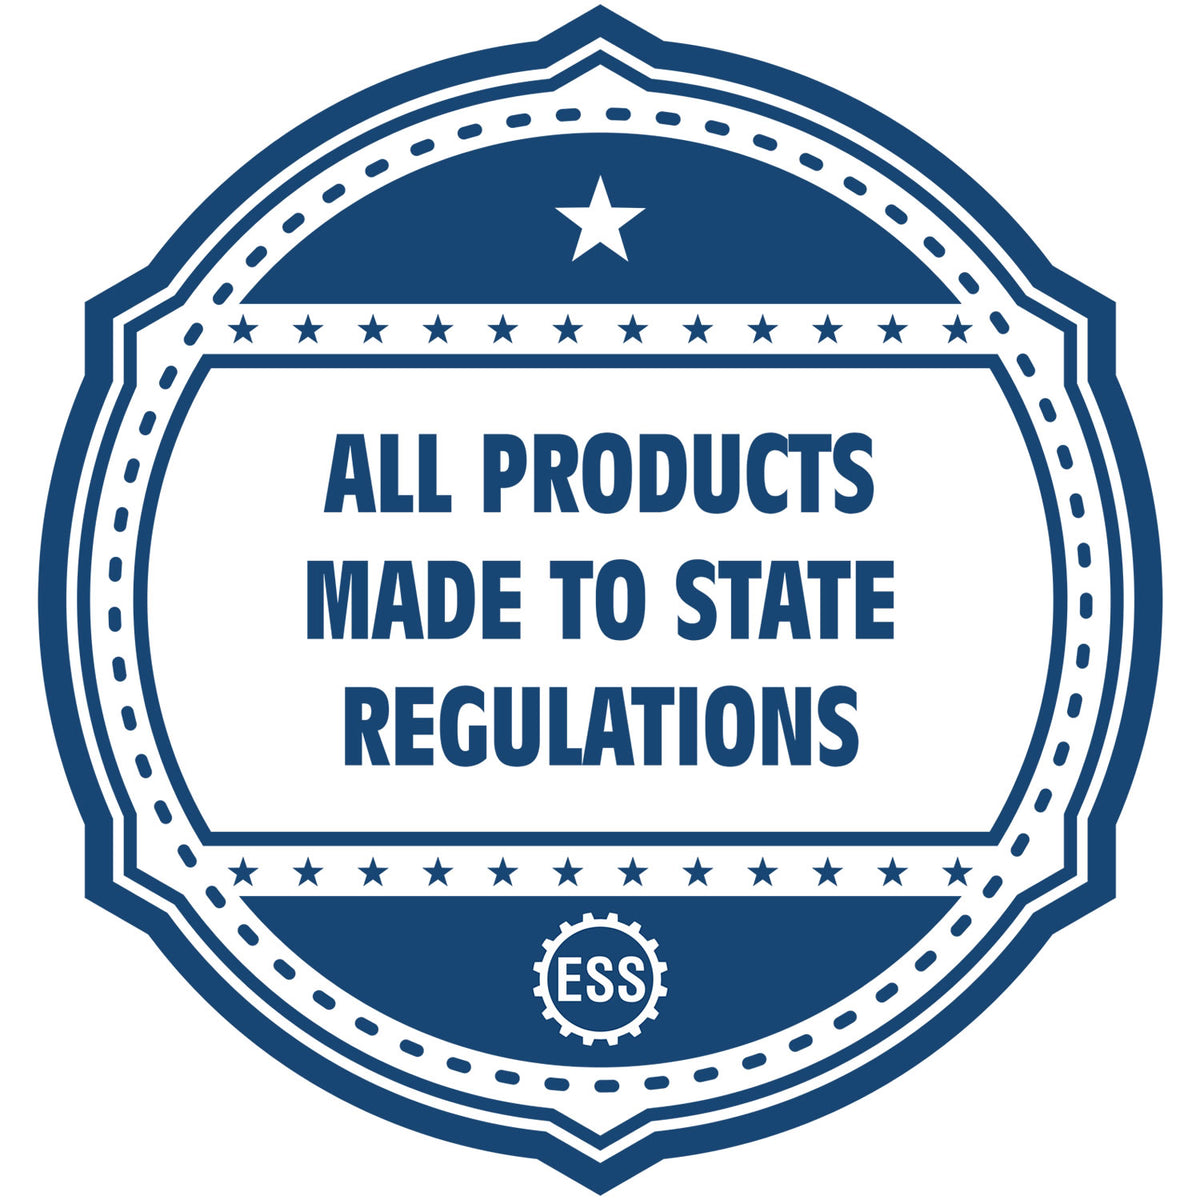 A blue icon or badge for the Hybrid Massachusetts Geologist Seal showing that this product is made in compliance with state regulations.